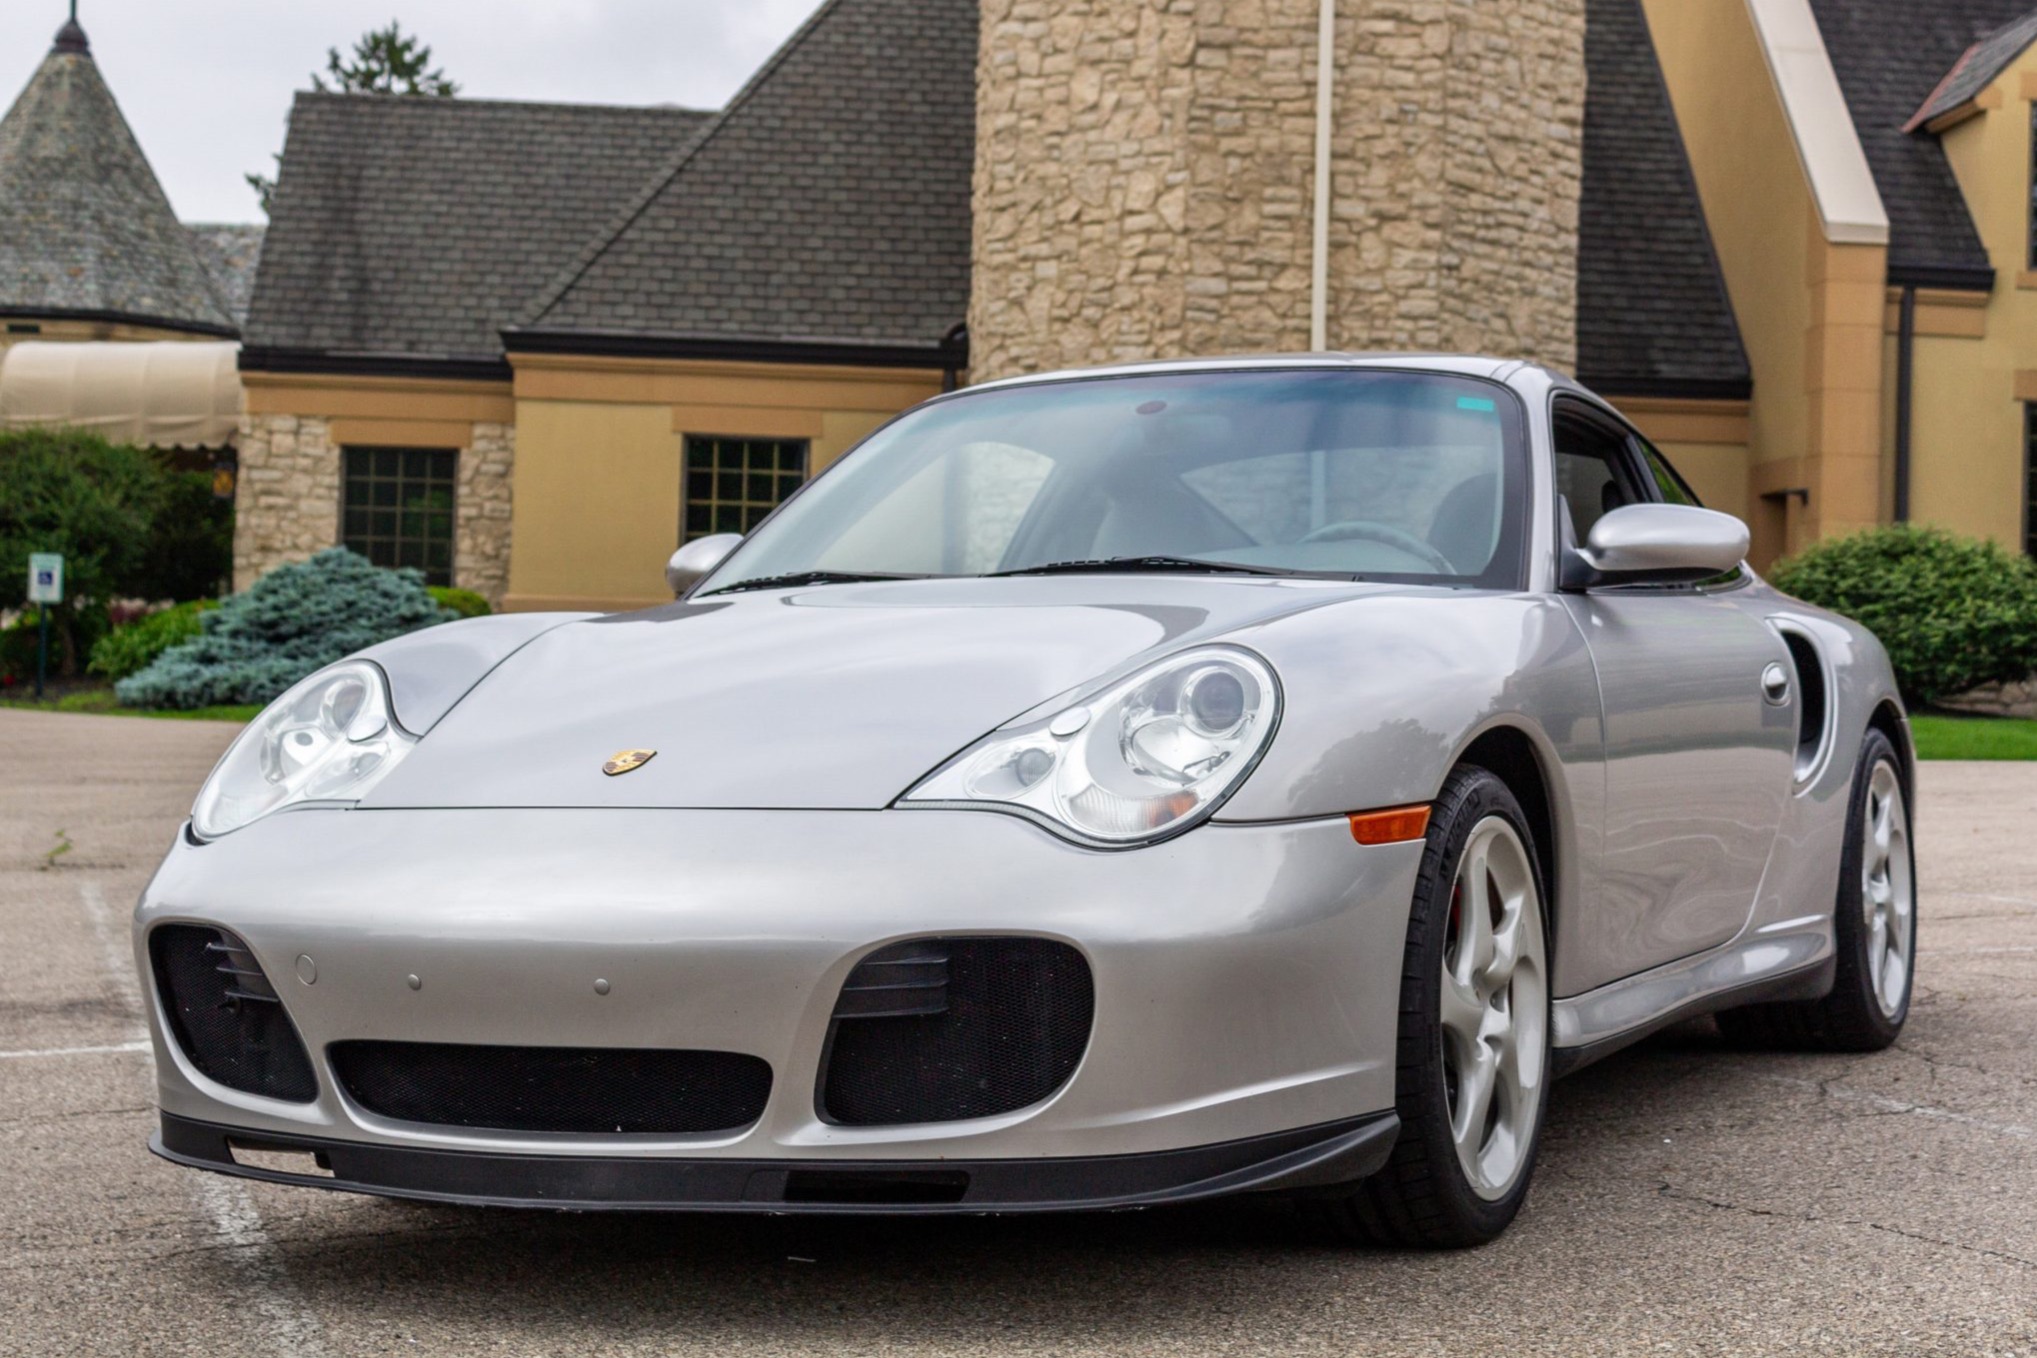 Used 2003 Porsche 911 Turbo Coupe 6-Speed Review